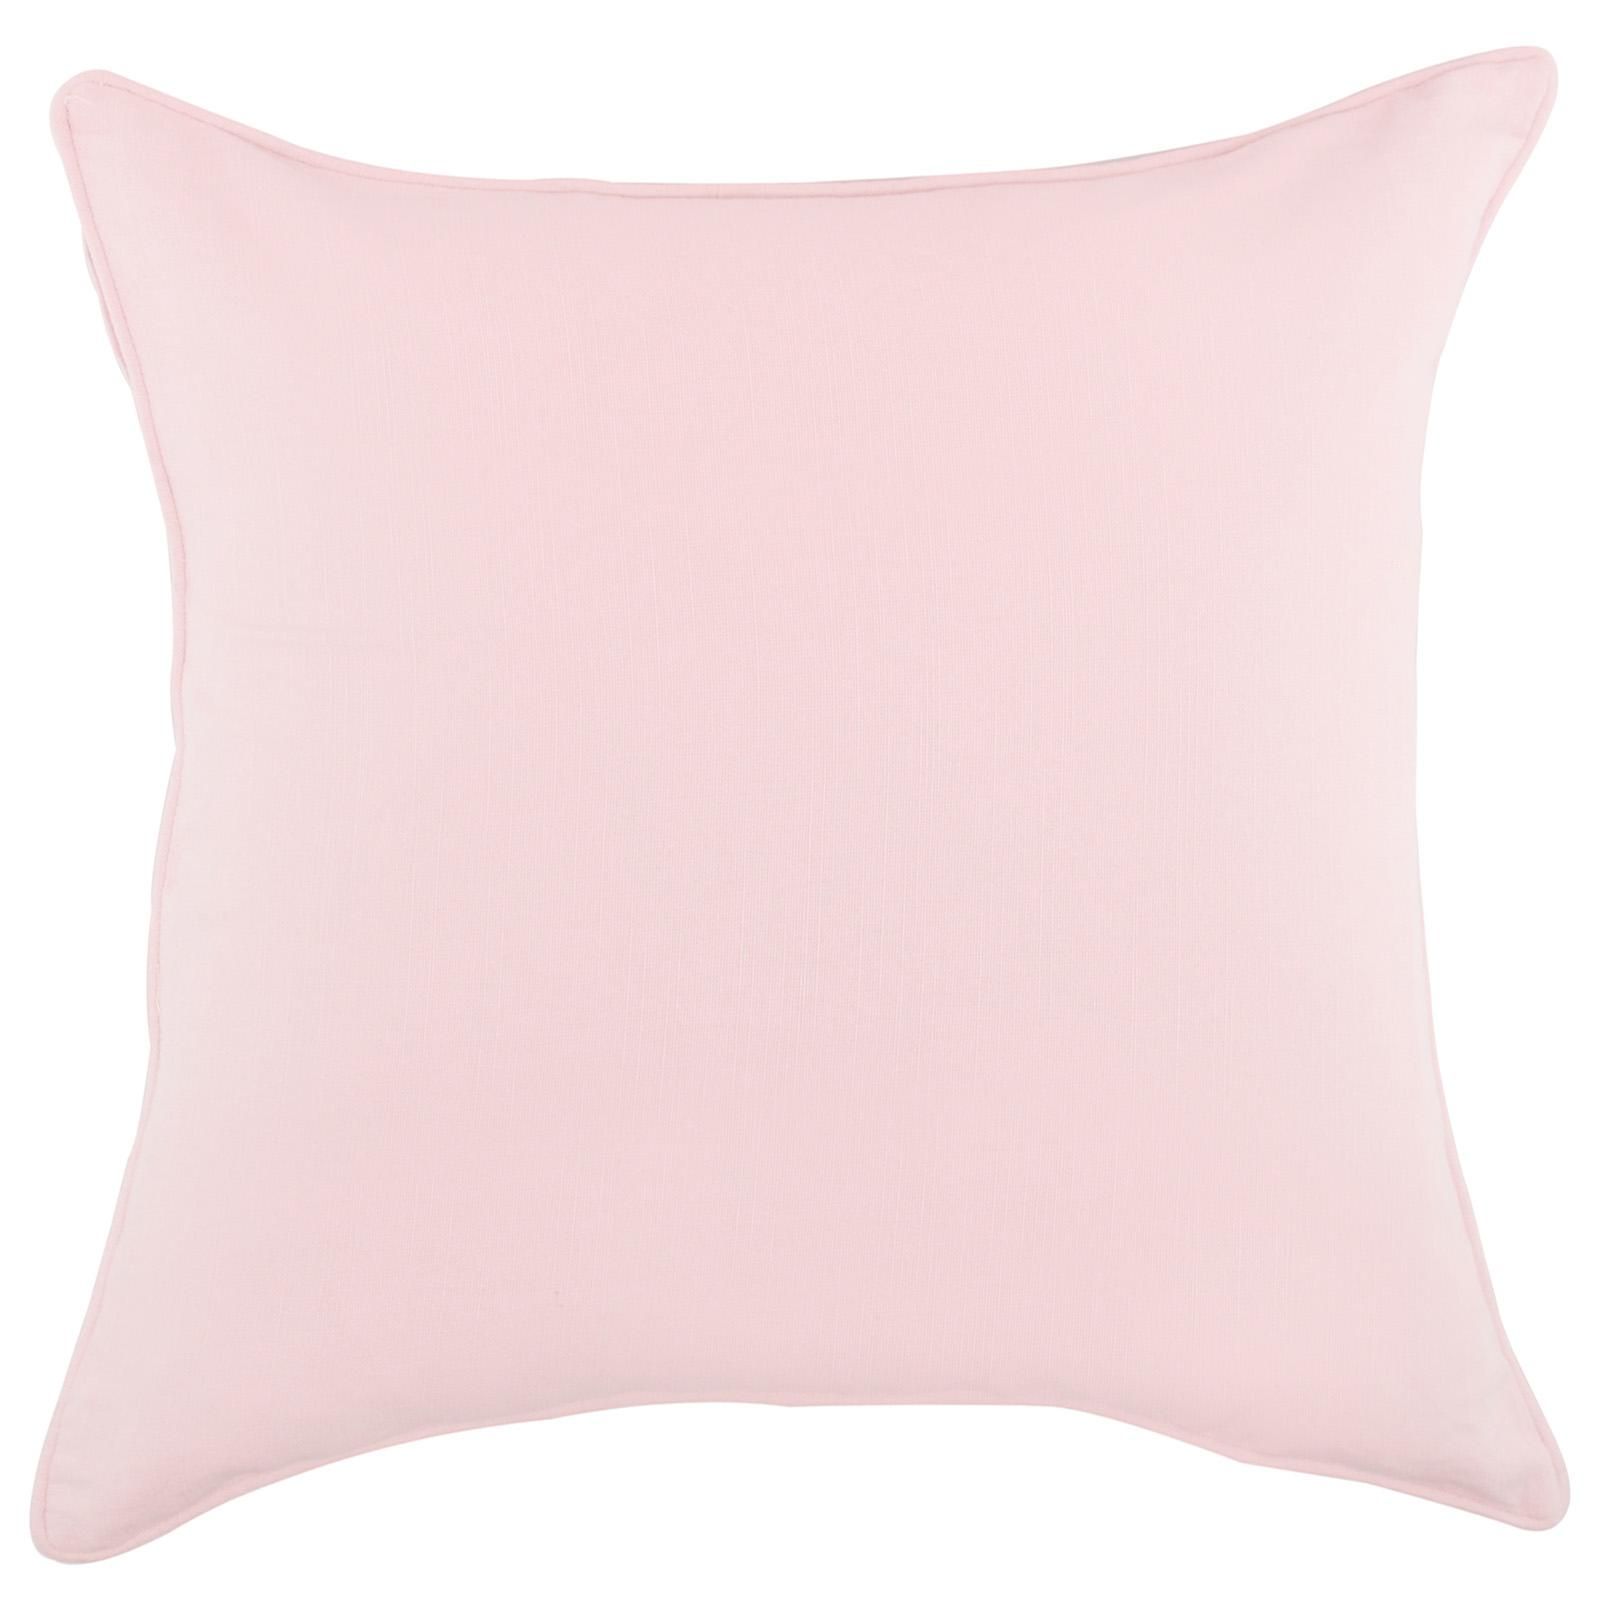 American Colors Brand Heritage Cotton Solid Pillow Blush | Hayneedle